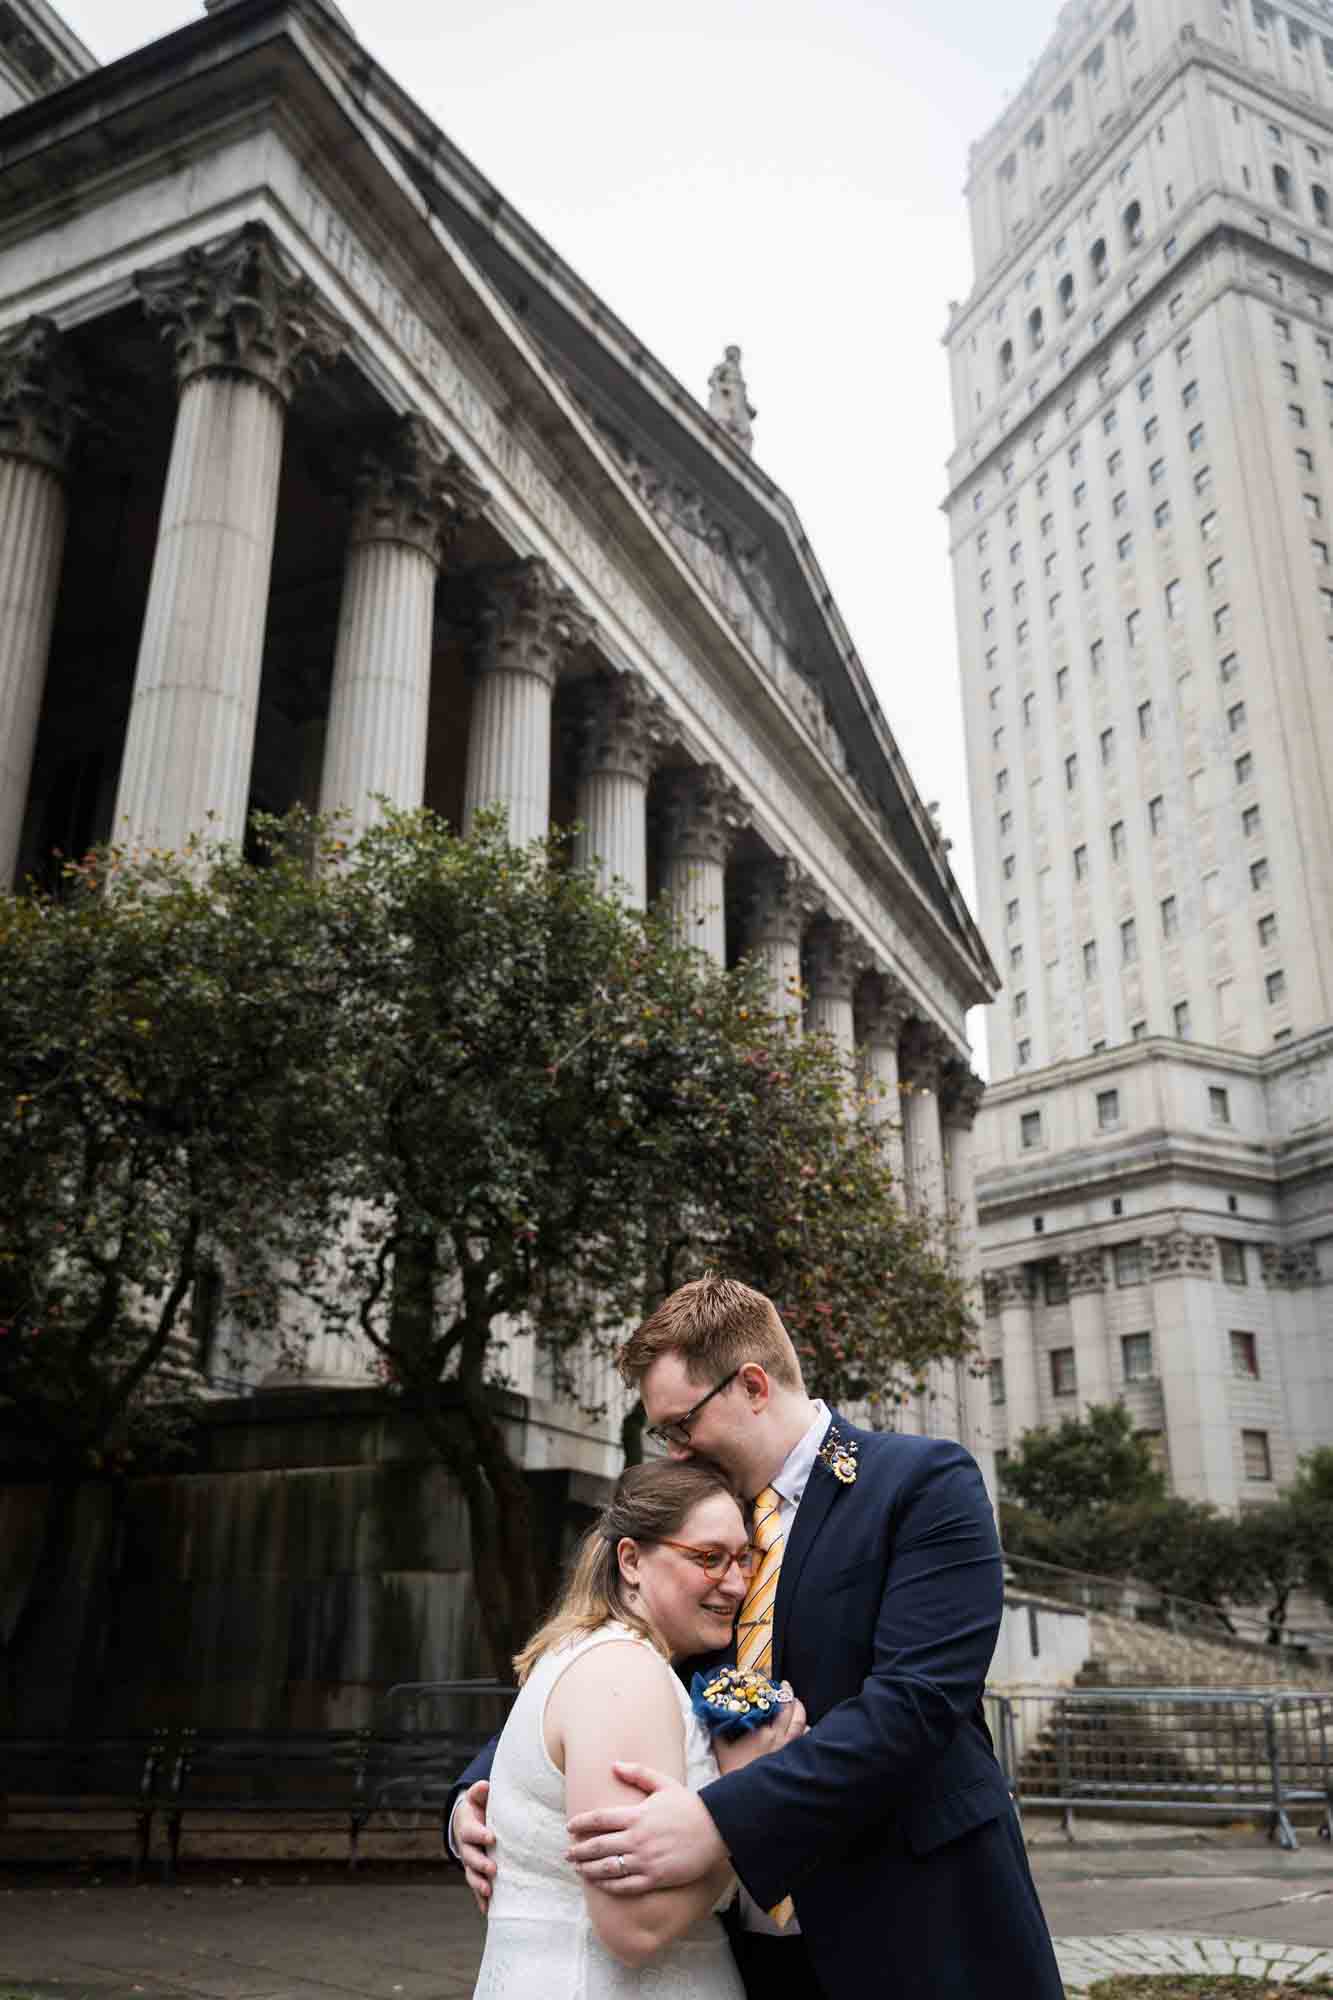 Couple kissing in front of Greek-style federal building for an article on how to get a marriage license in San Antonio